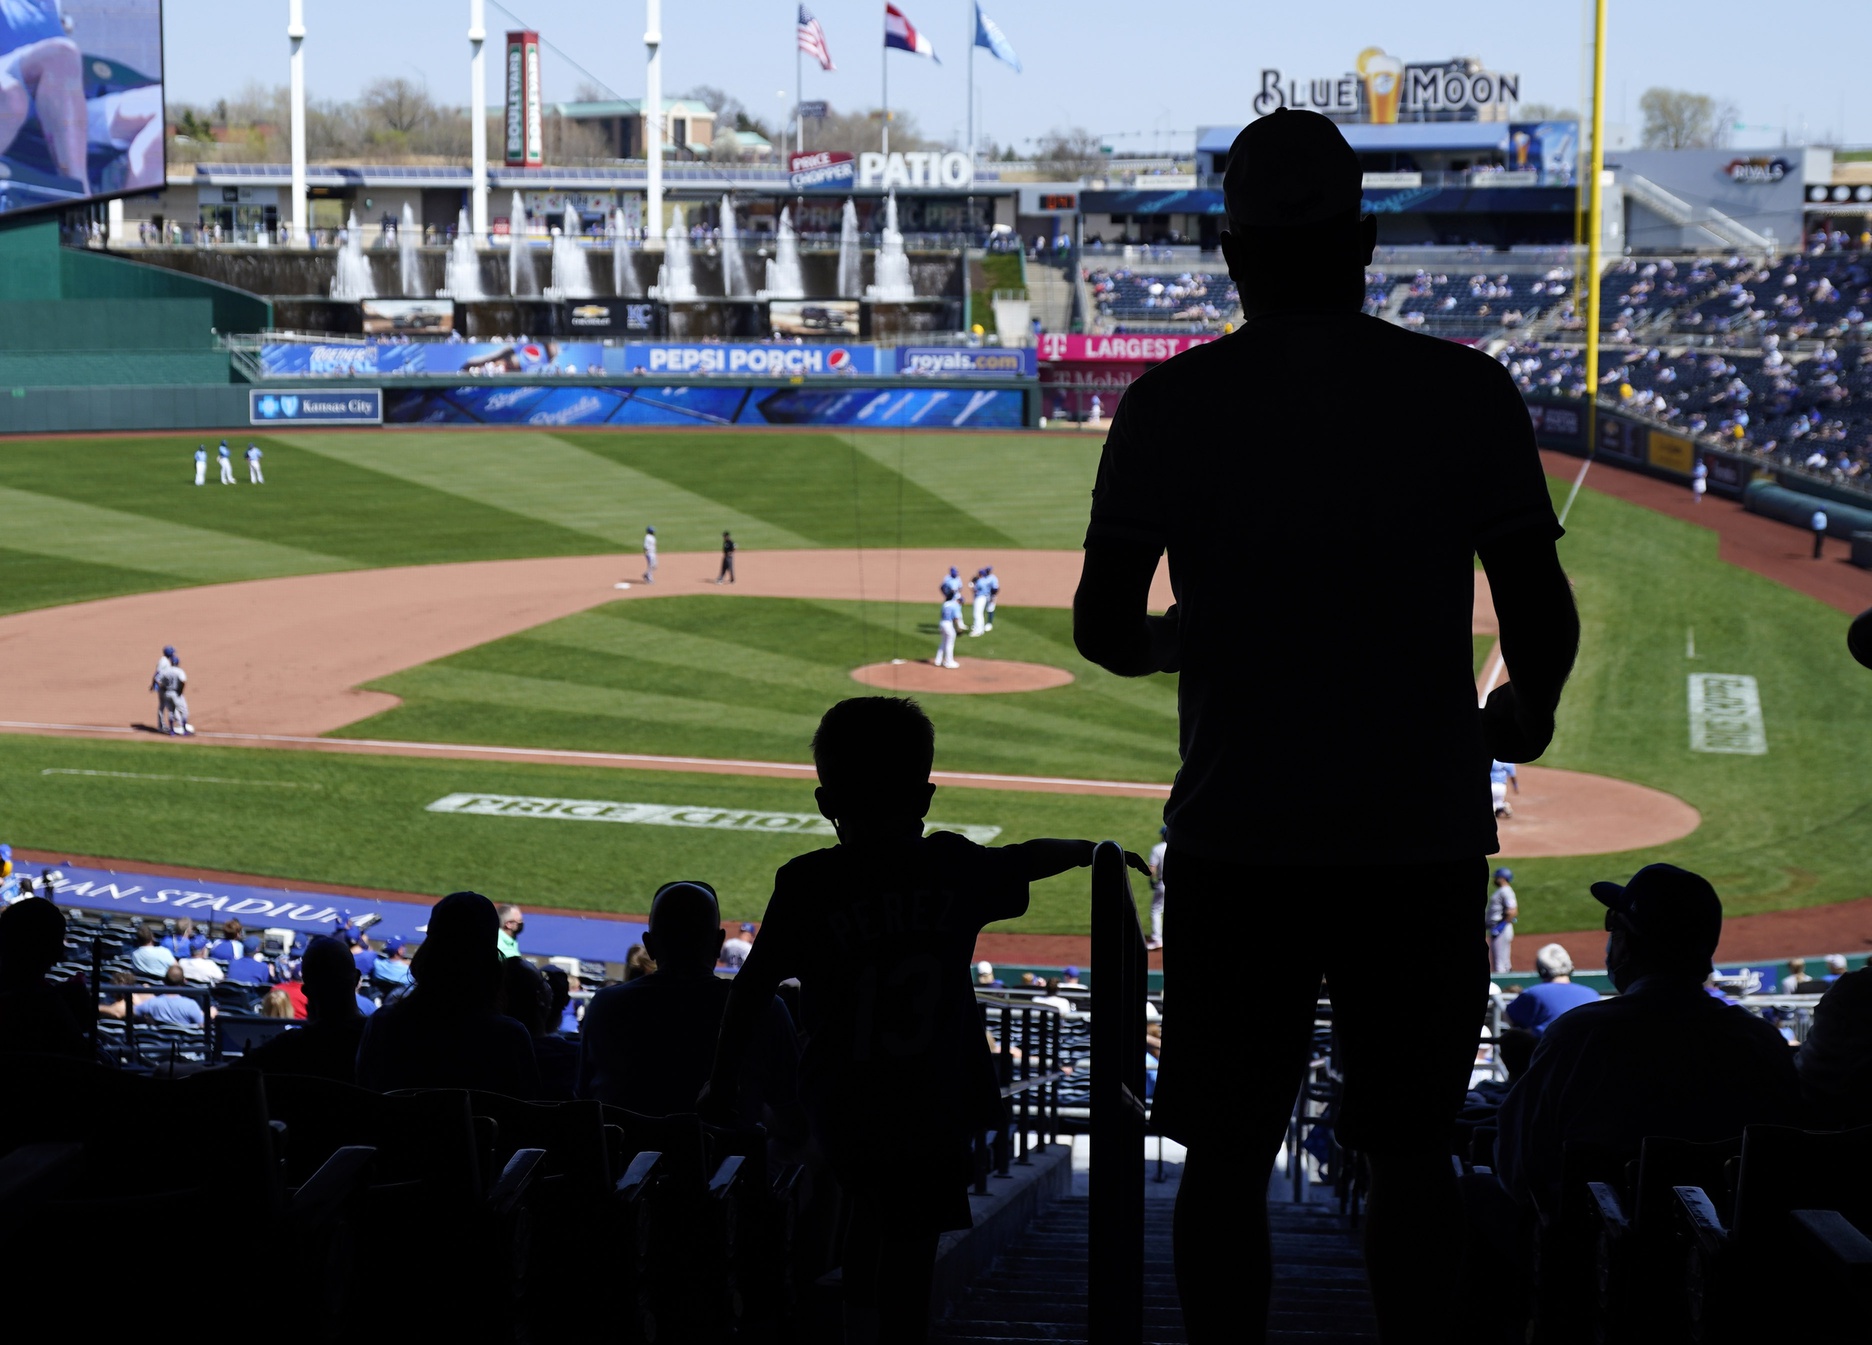 Kansas City Royals confirm fans will be allowed to watch games